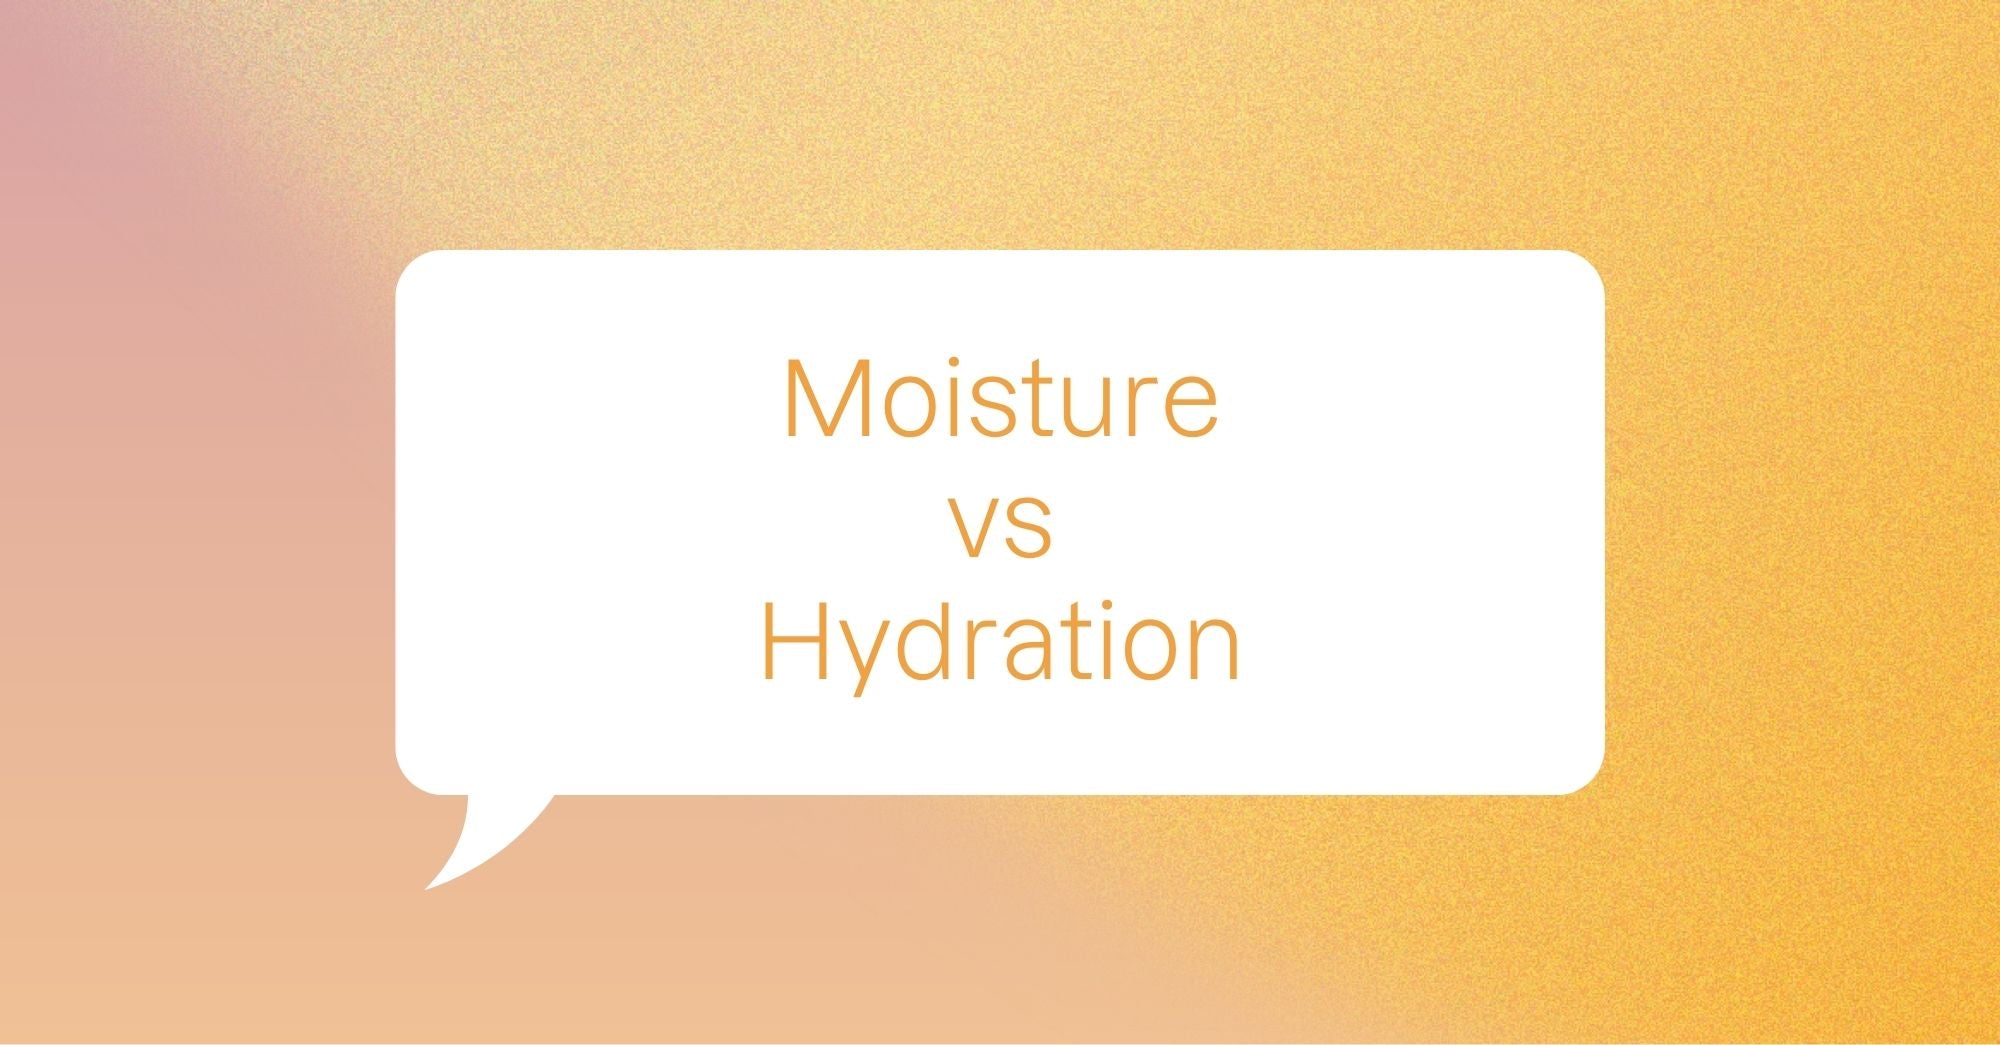 Moisture vs. Hydration? The Quick Study Guide